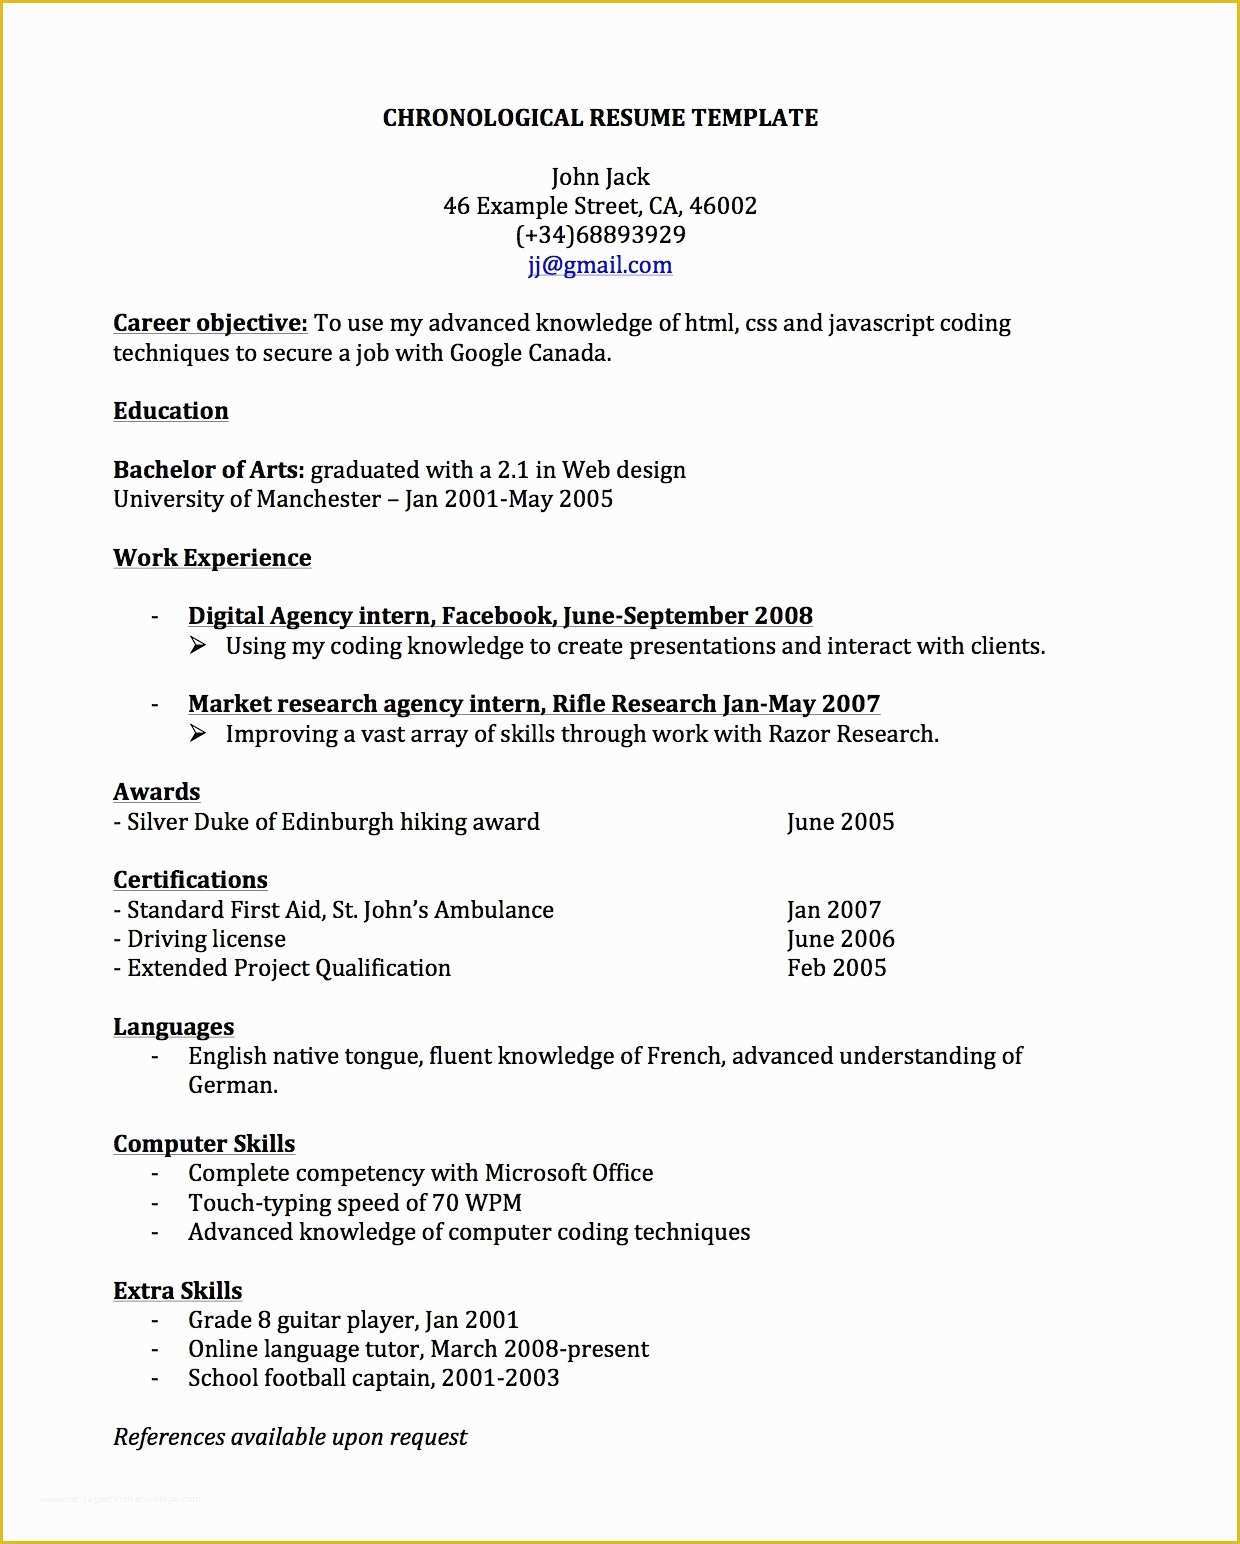 Canadian Resume Template Free Of Chronological Resume for Canada